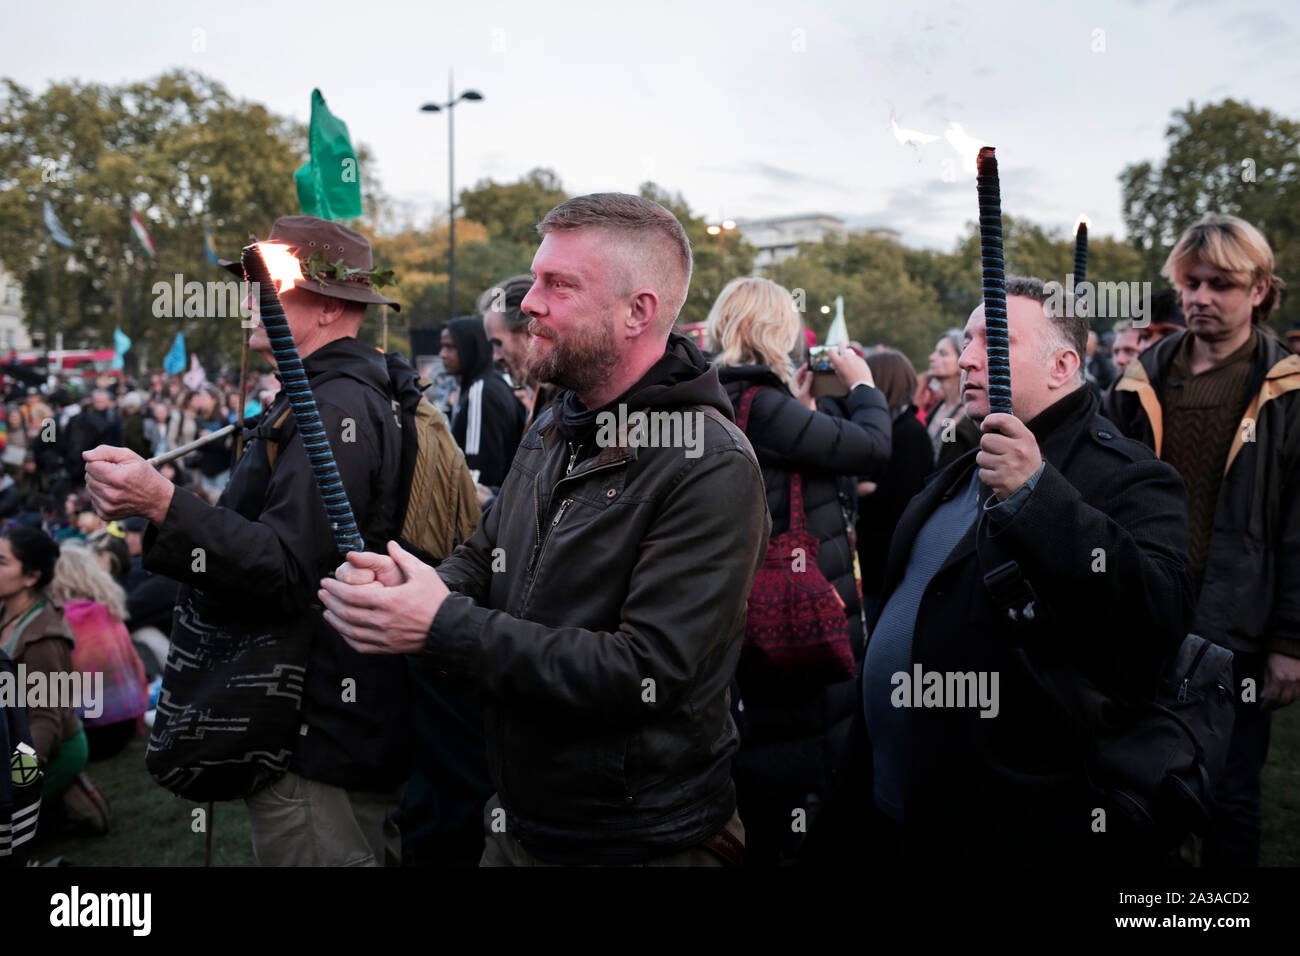 London, UK. 6th October 2019. Extinction Rebellion activists gather at Marble Arch for the start of two weeks of protests in which they plan to block every single road into central London. Other protest are expected in about 60 cities around the world. Credit: Stuart Boulton/Alamy Stock Photo